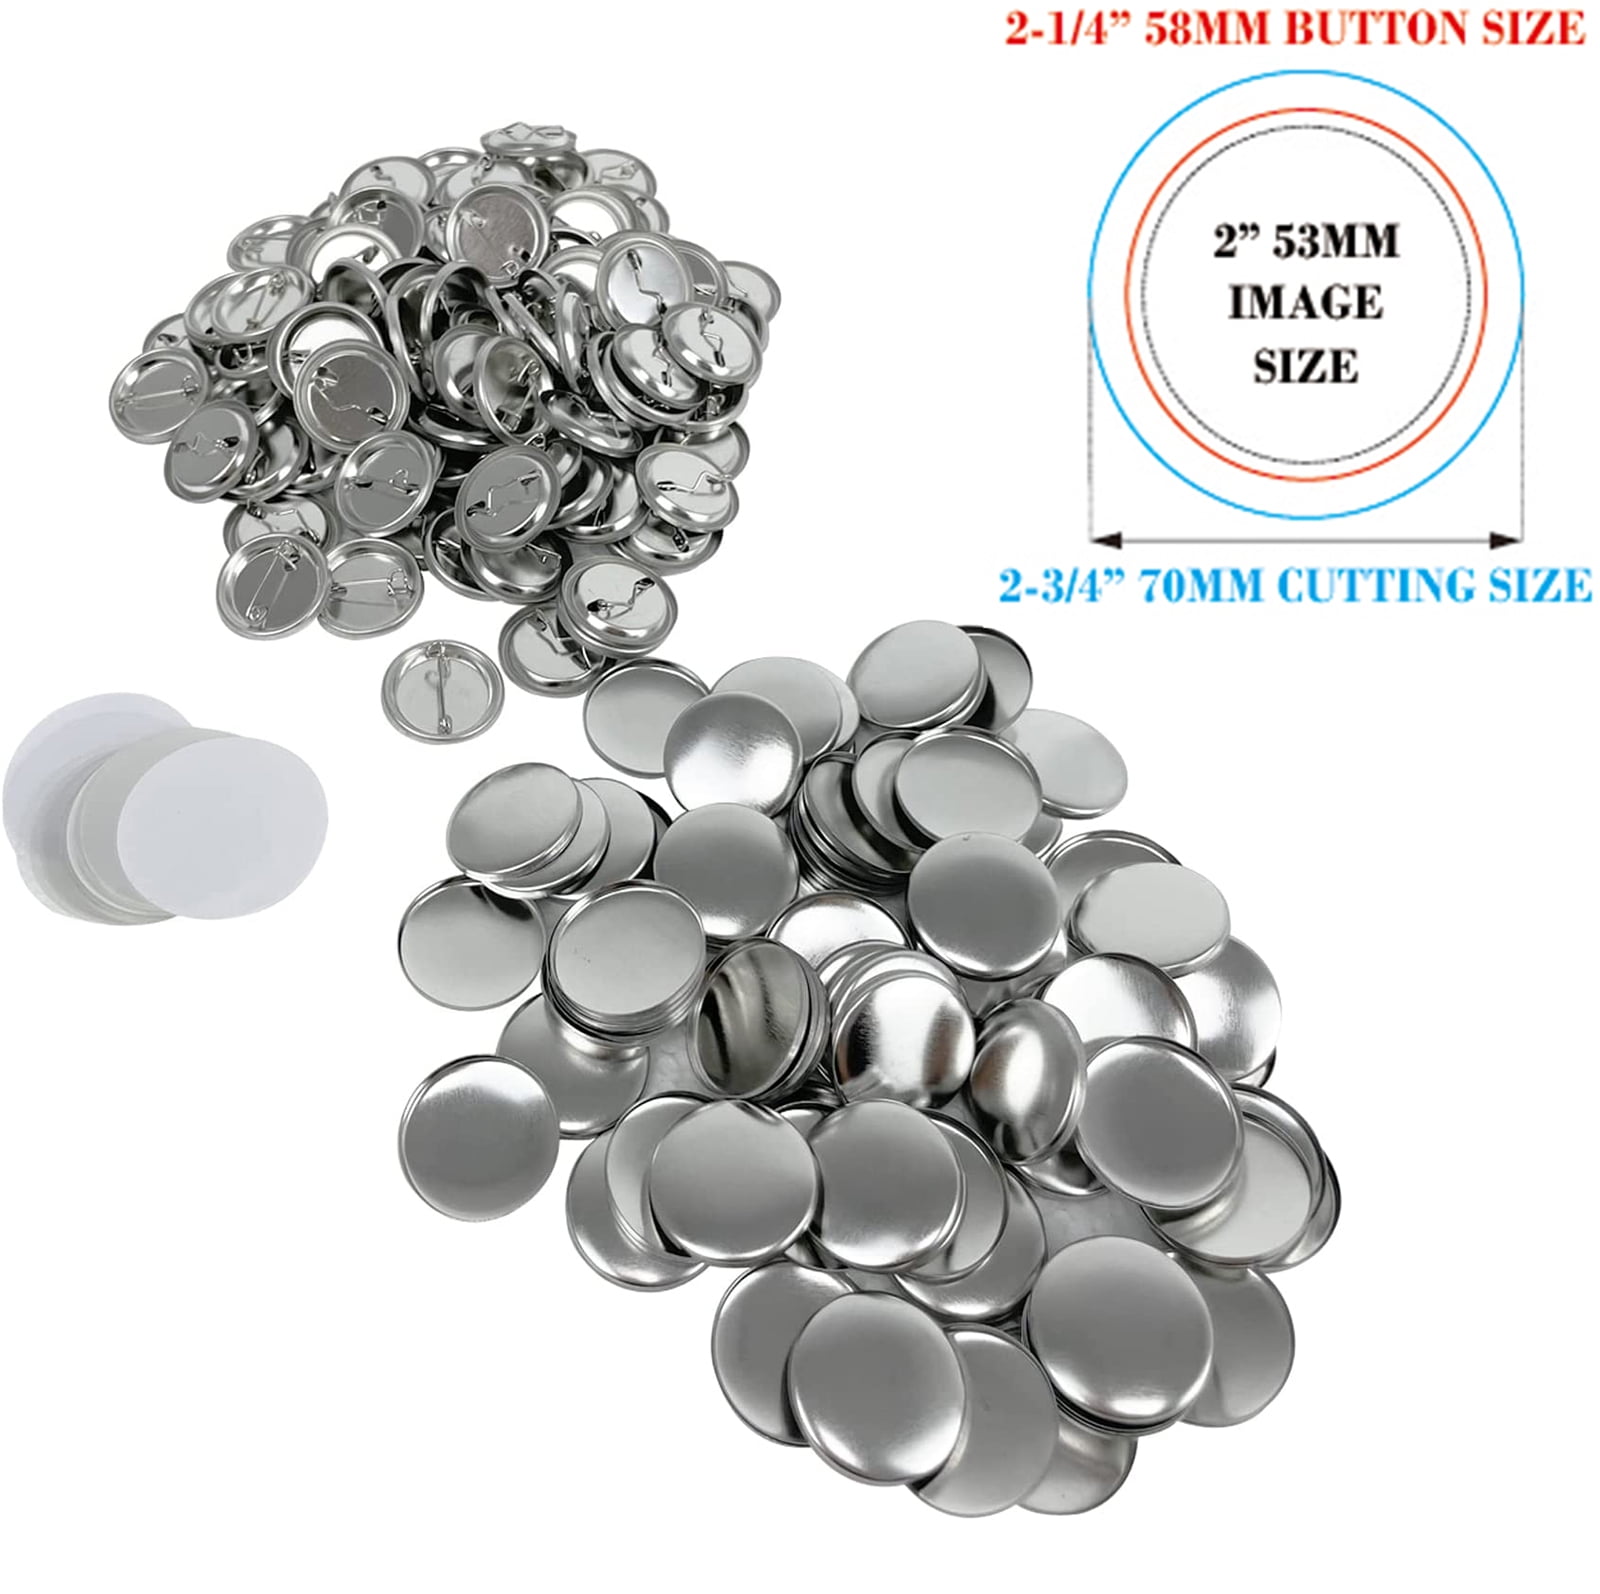 2-1/4 button making supplies include shells, mylar and pinned backs.